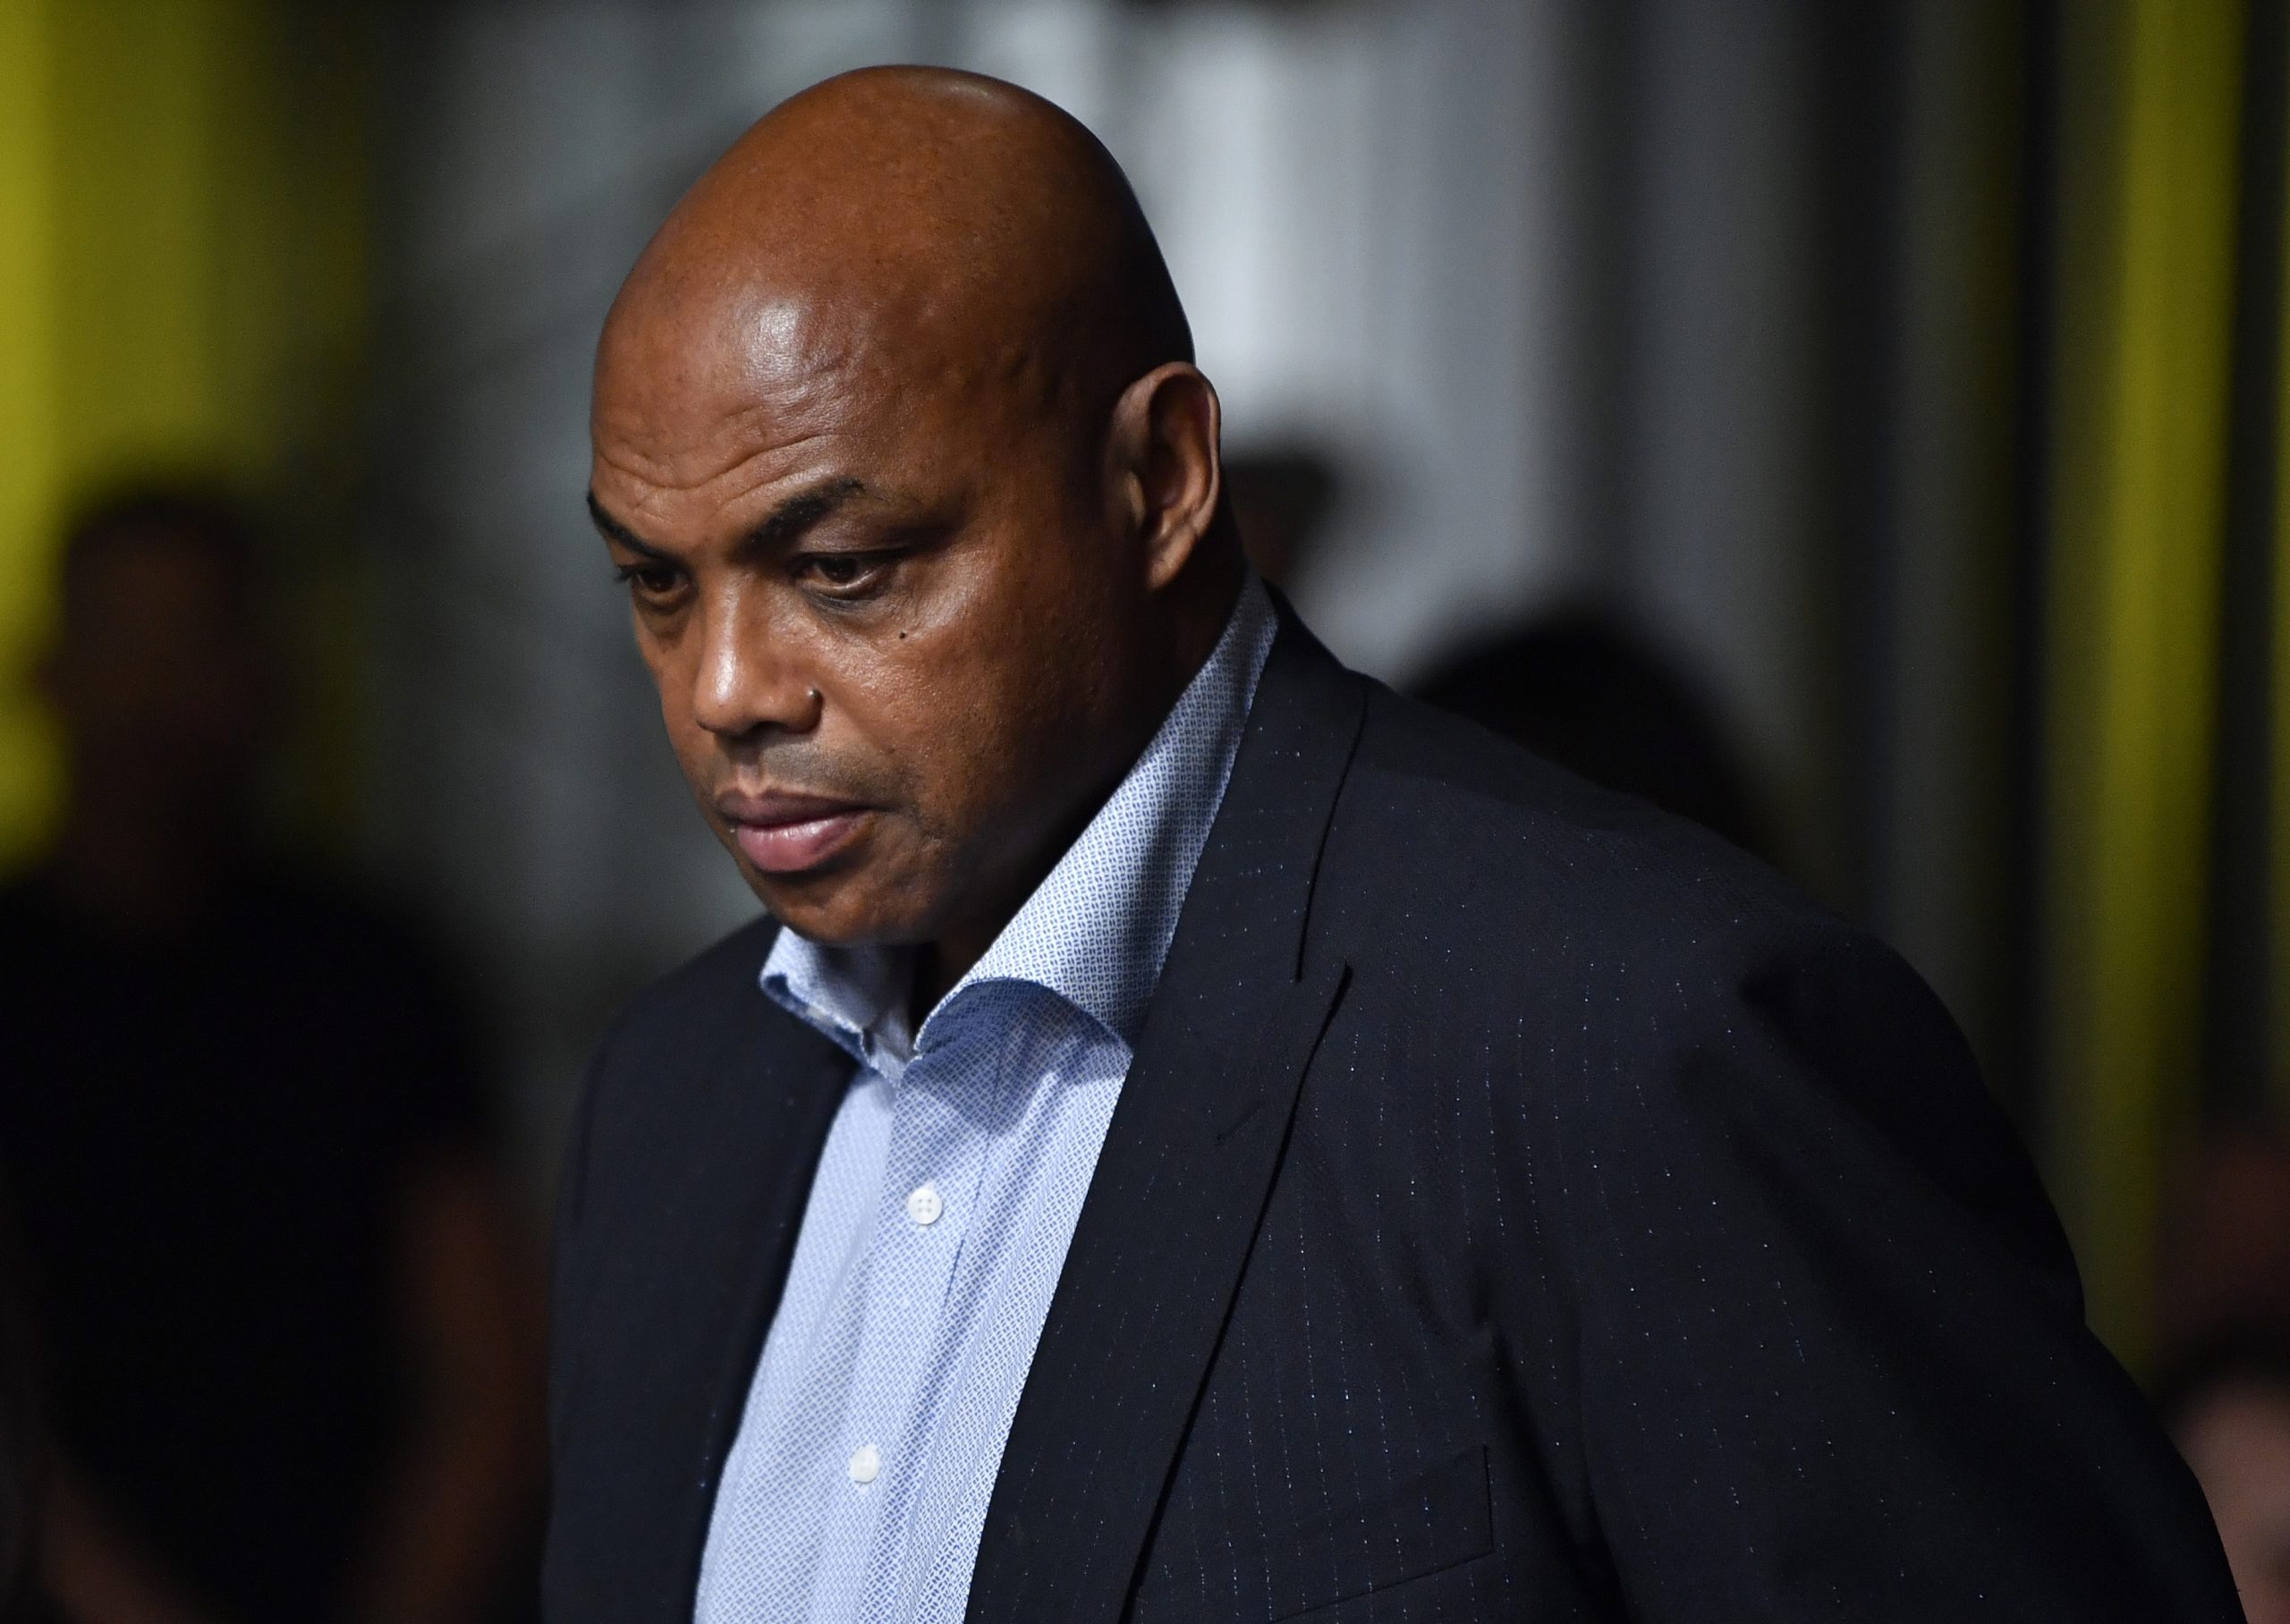 Charles Barkley Proves Right With His Comments About Kyrie Irving and the Brooklyn Nets